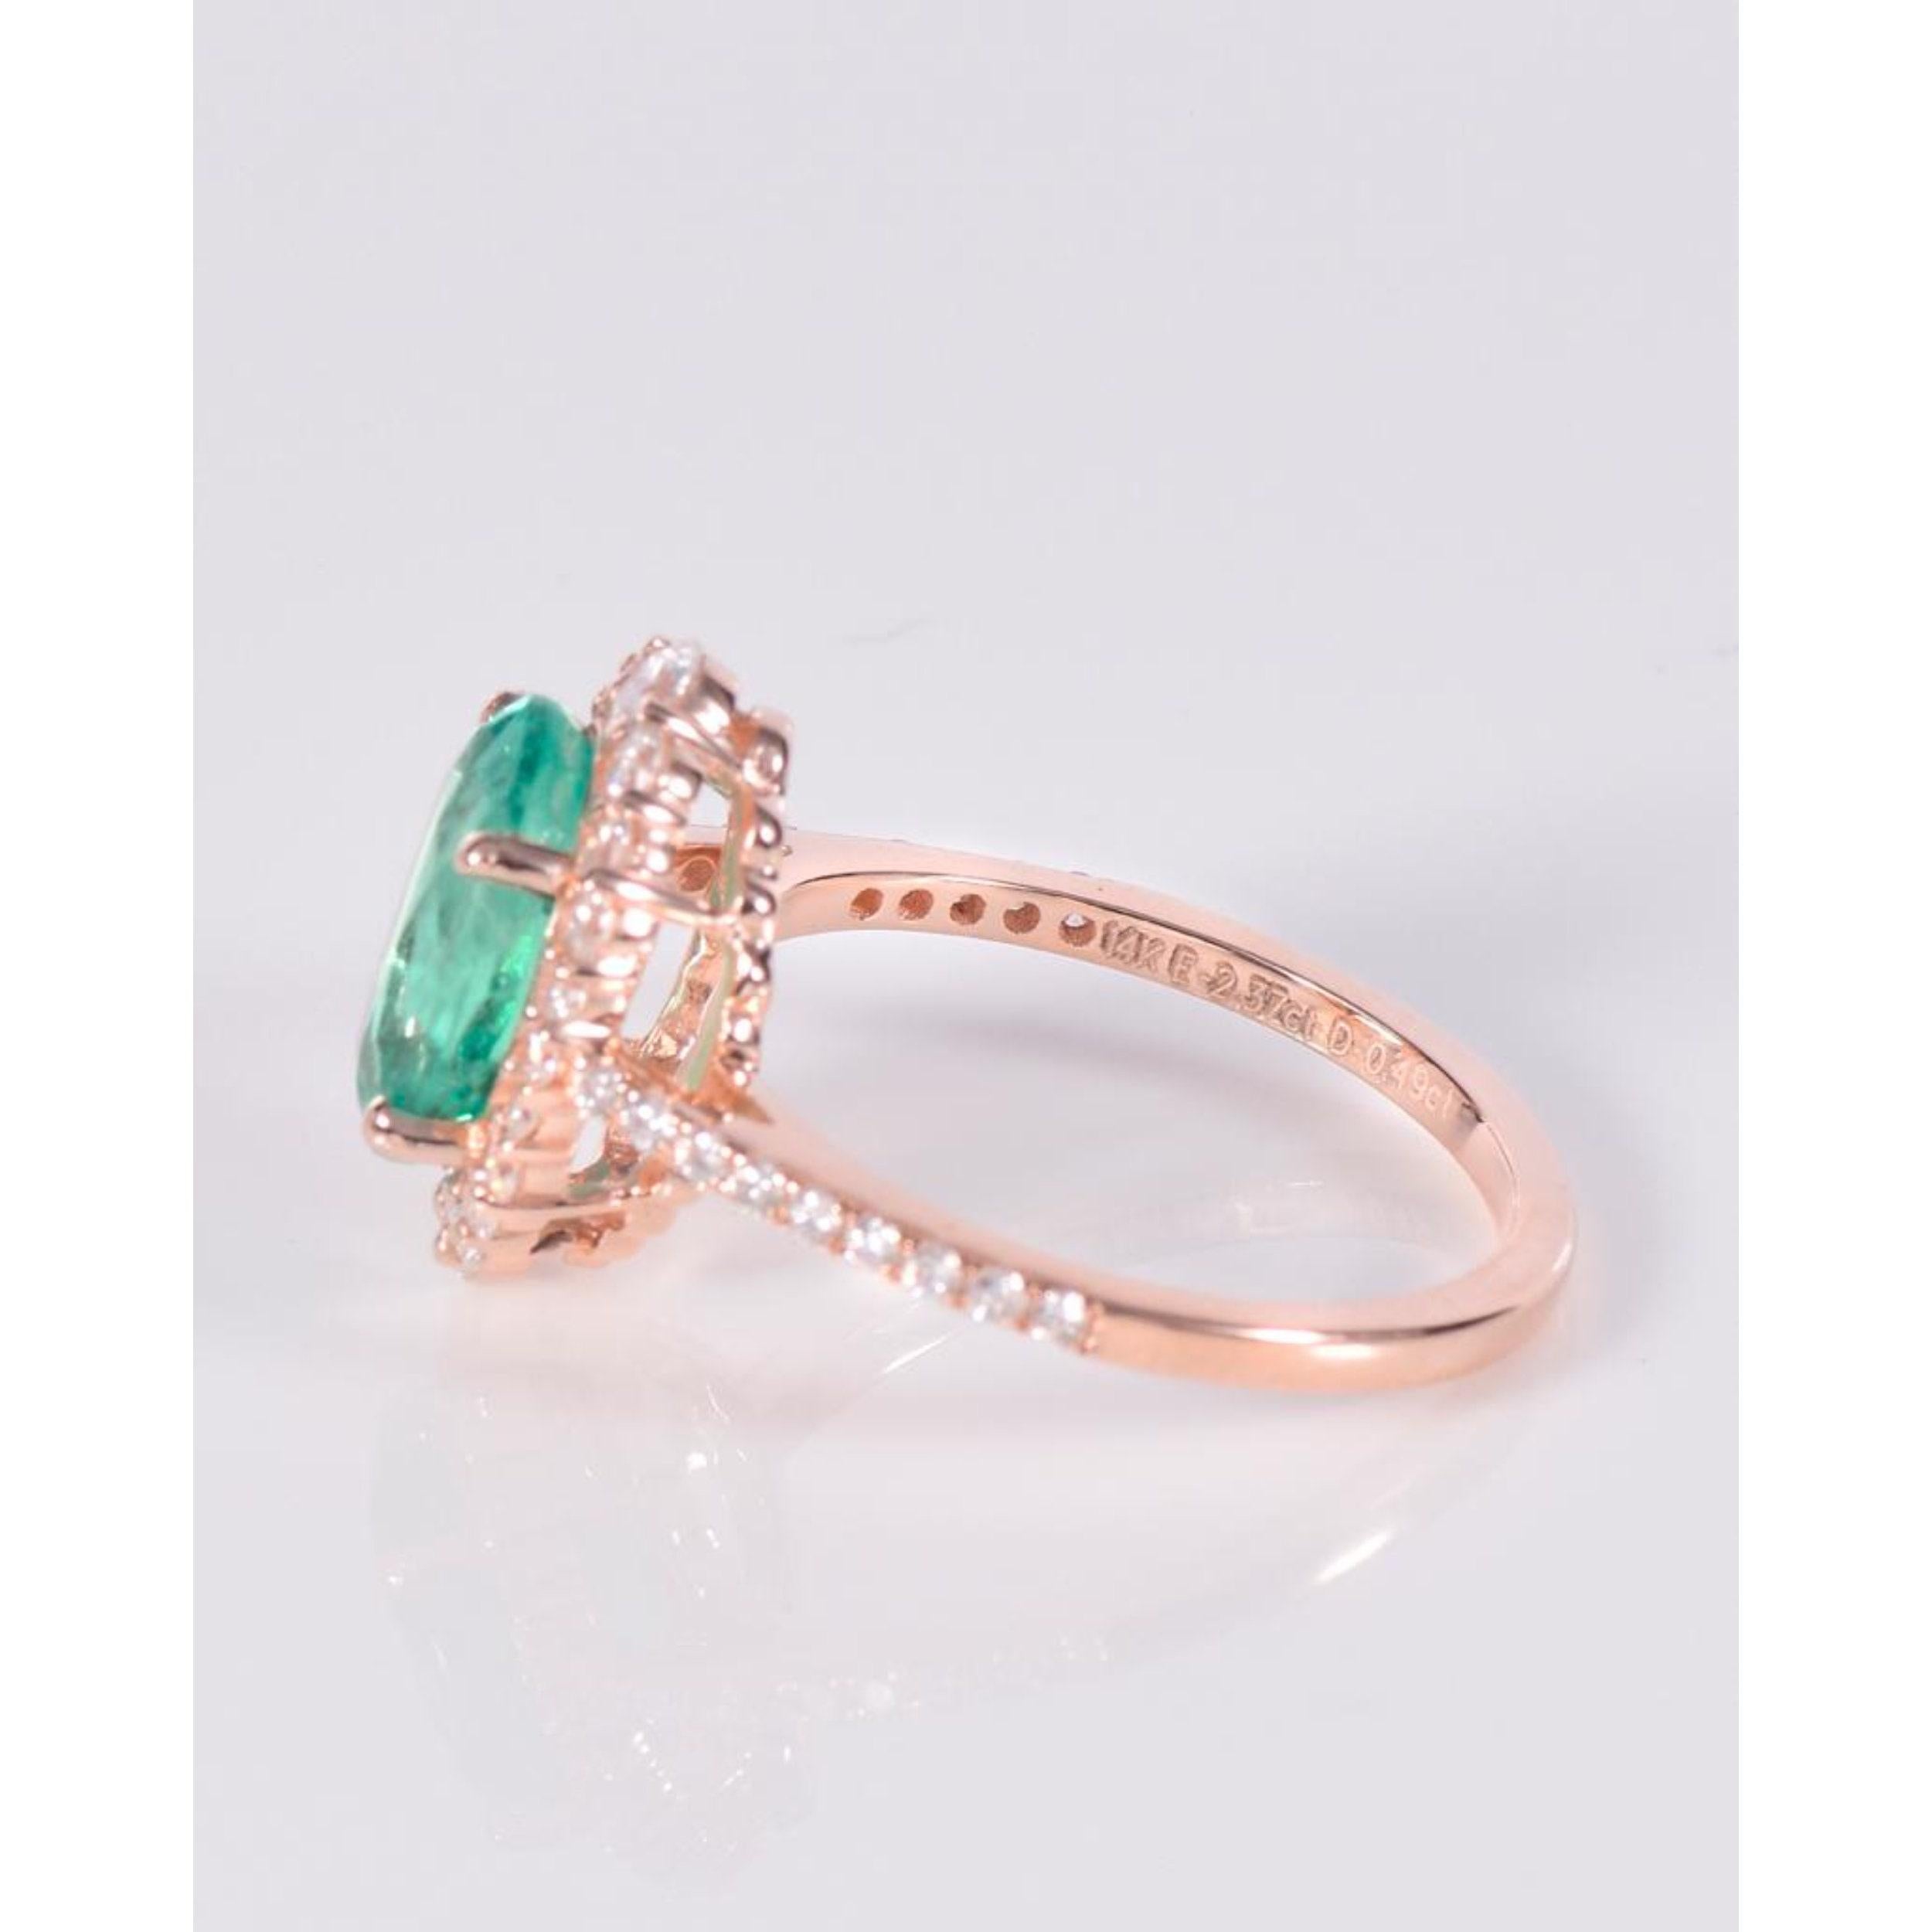 For Sale:  18K Gold 2 CT Natural Emerald and Diamond Antique Art Deco Style Engagement Ring 6